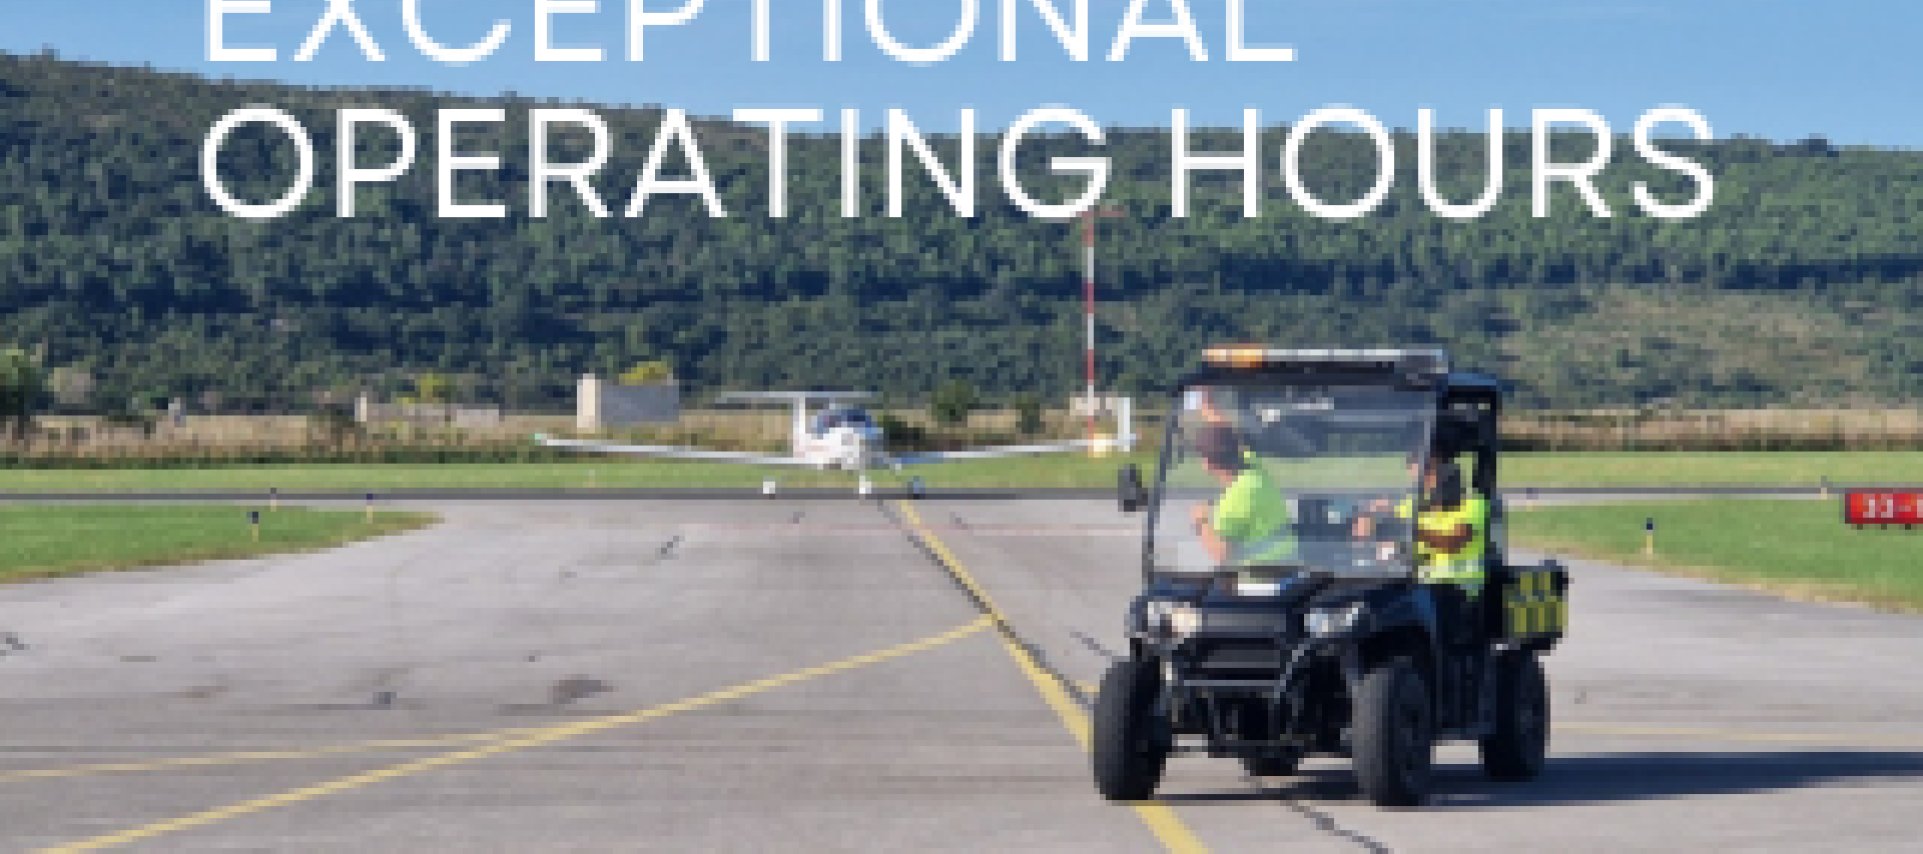 Exceptional operating hours